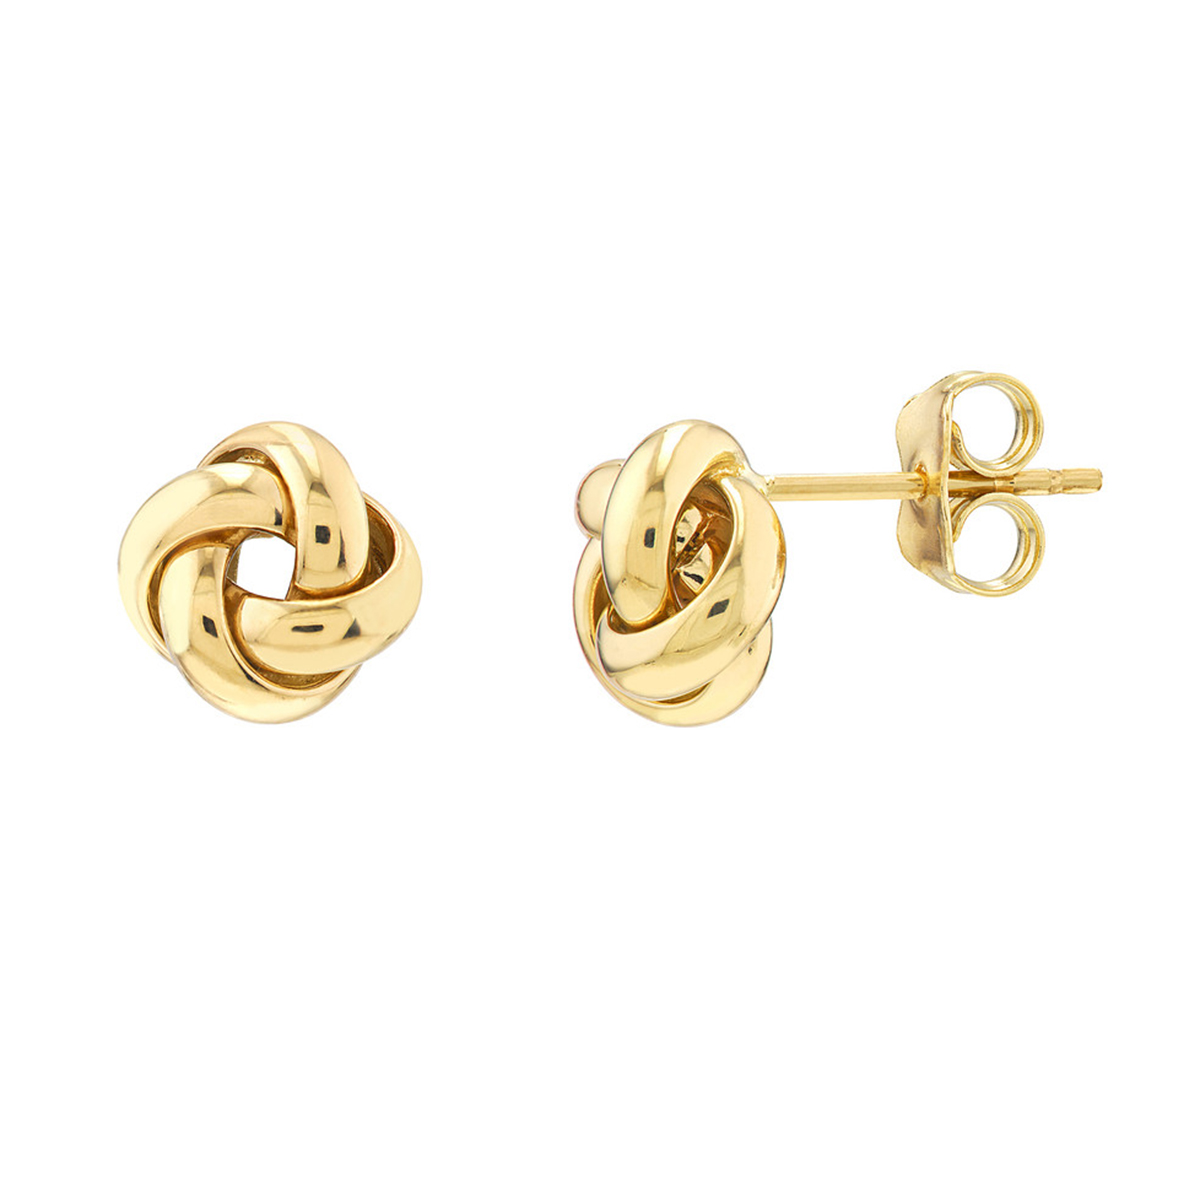 Image of 14K Yellow Gold Puffed Love Knot Stud Earrings